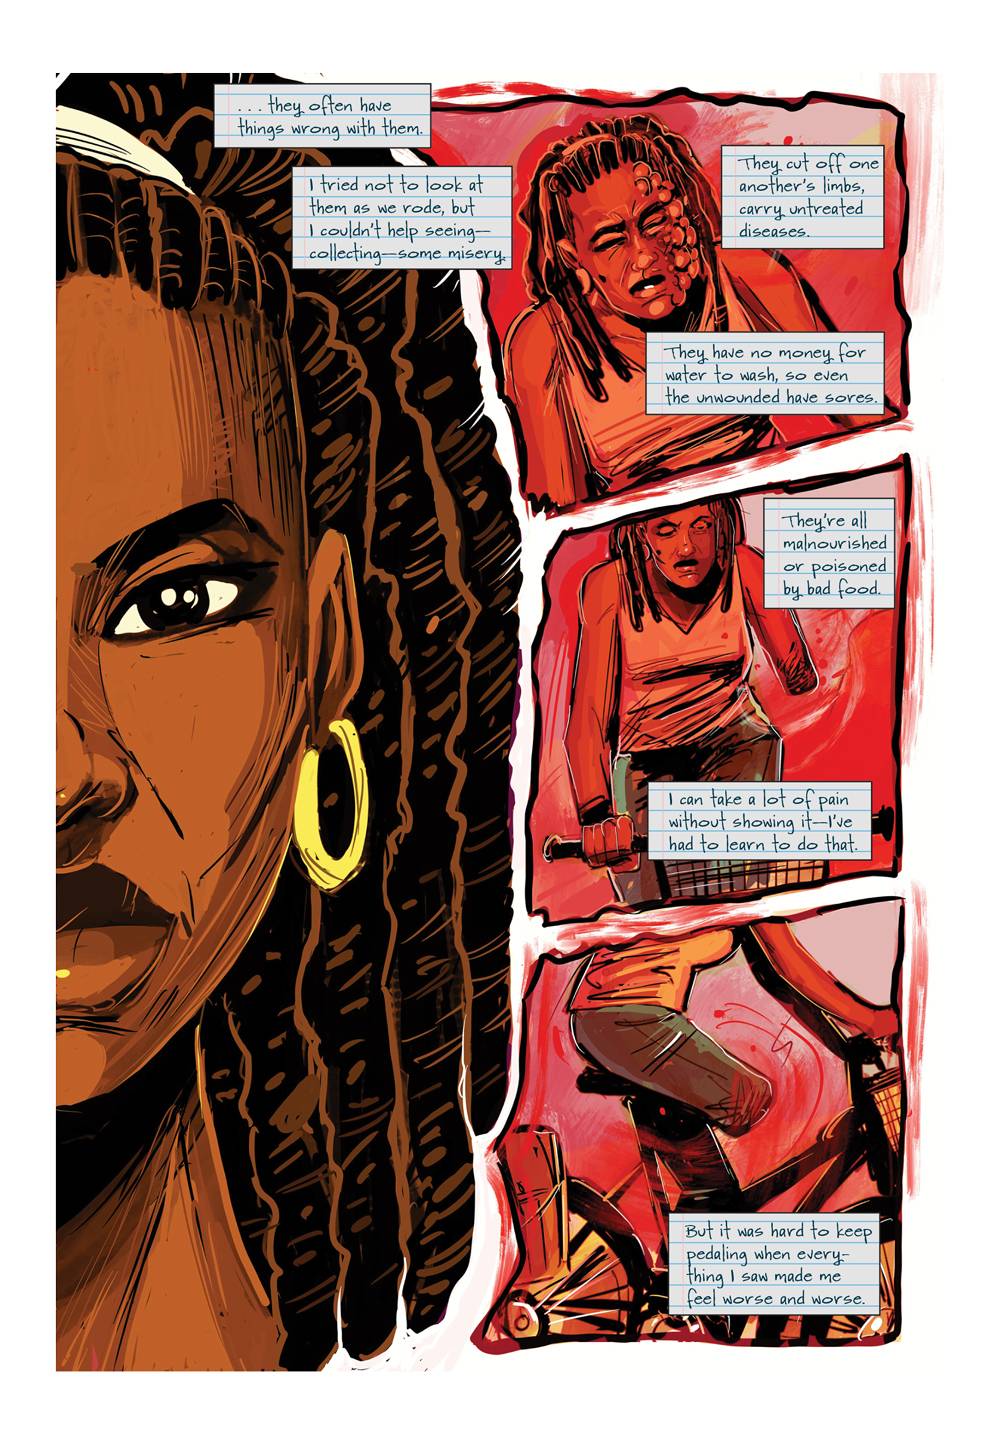 A page from â€œParable of the Sower.â€ There are three horizontal panels featuring a disfigured young black woman riding a bike. The text bubbles are the words of the young woman explaining the pain and suffering of others. On the left side of the page is half of the face in frontal view of a young, black woman's face. Words by Damian Duffy, art by John Jennings. Image courtesy of Damian Duffy.